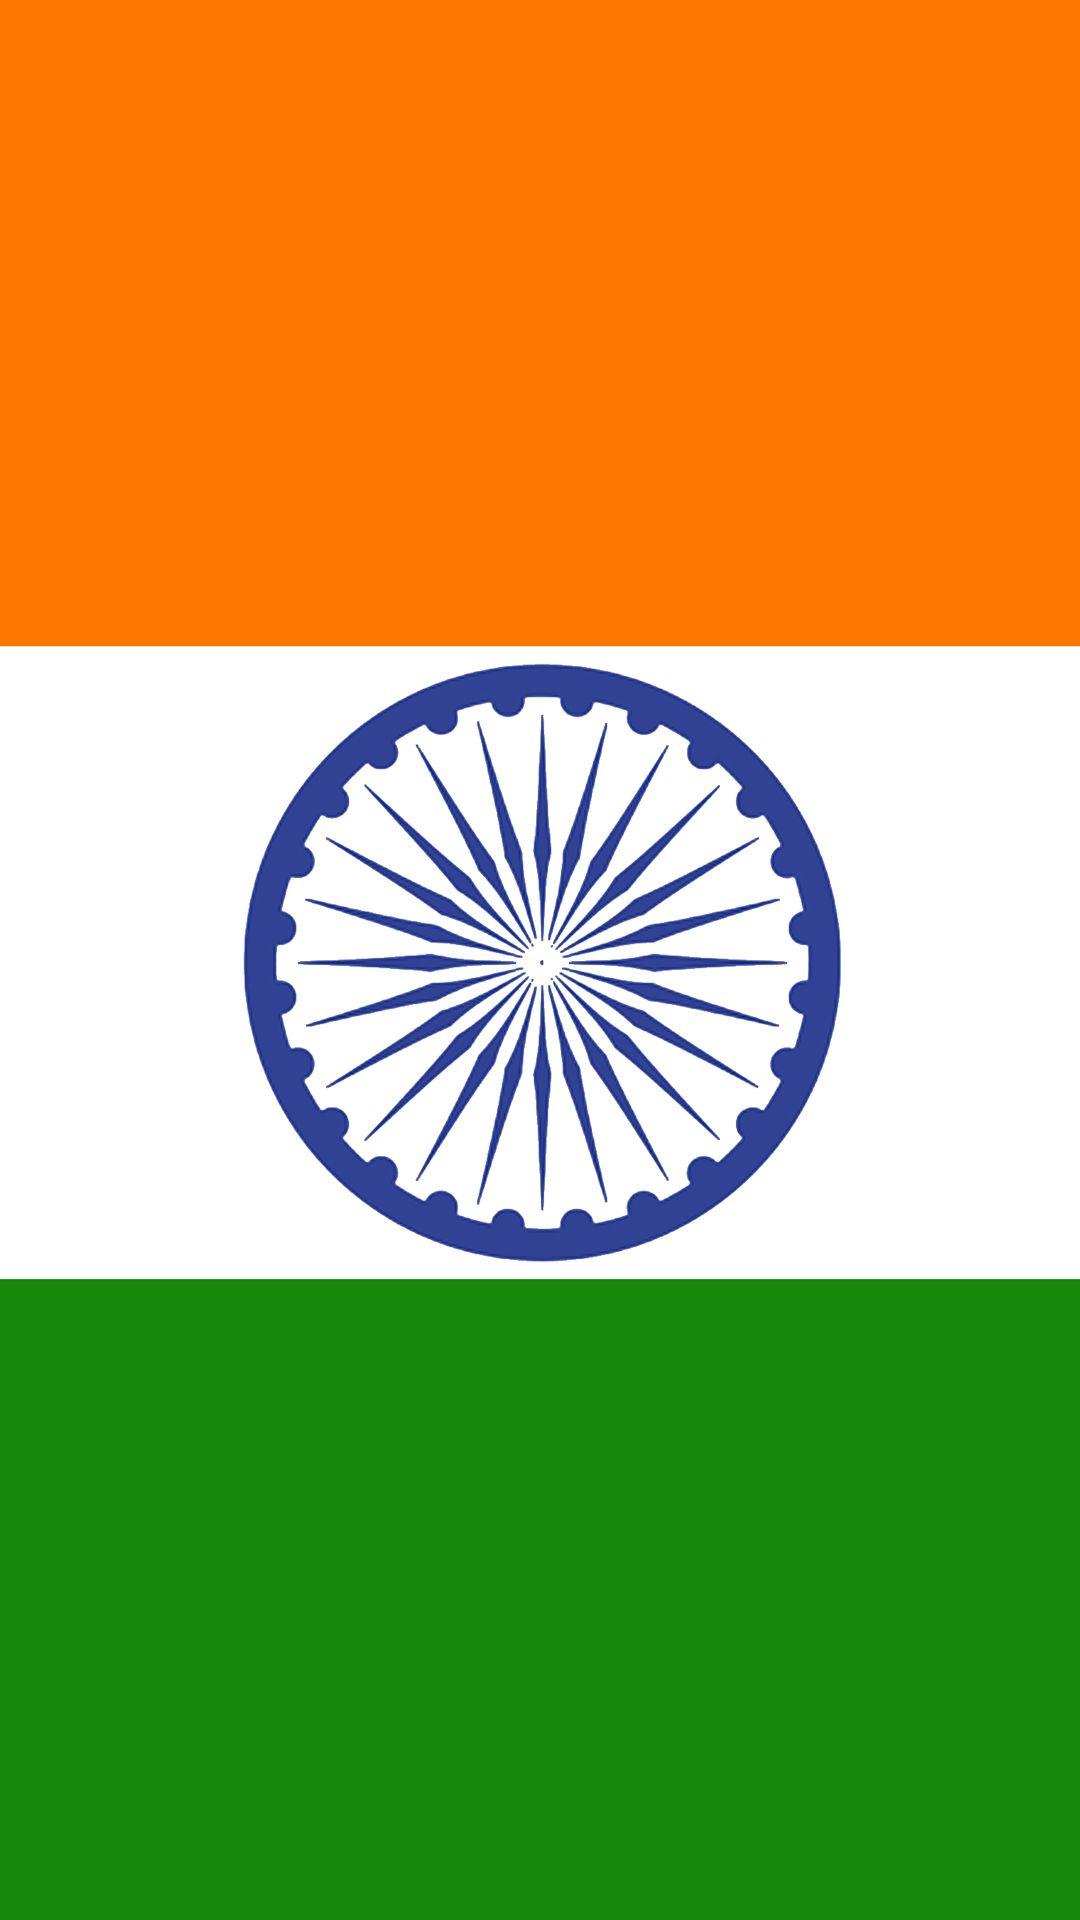 India Flag for Mobile Phone Wallpaper 01 of 17 Picture